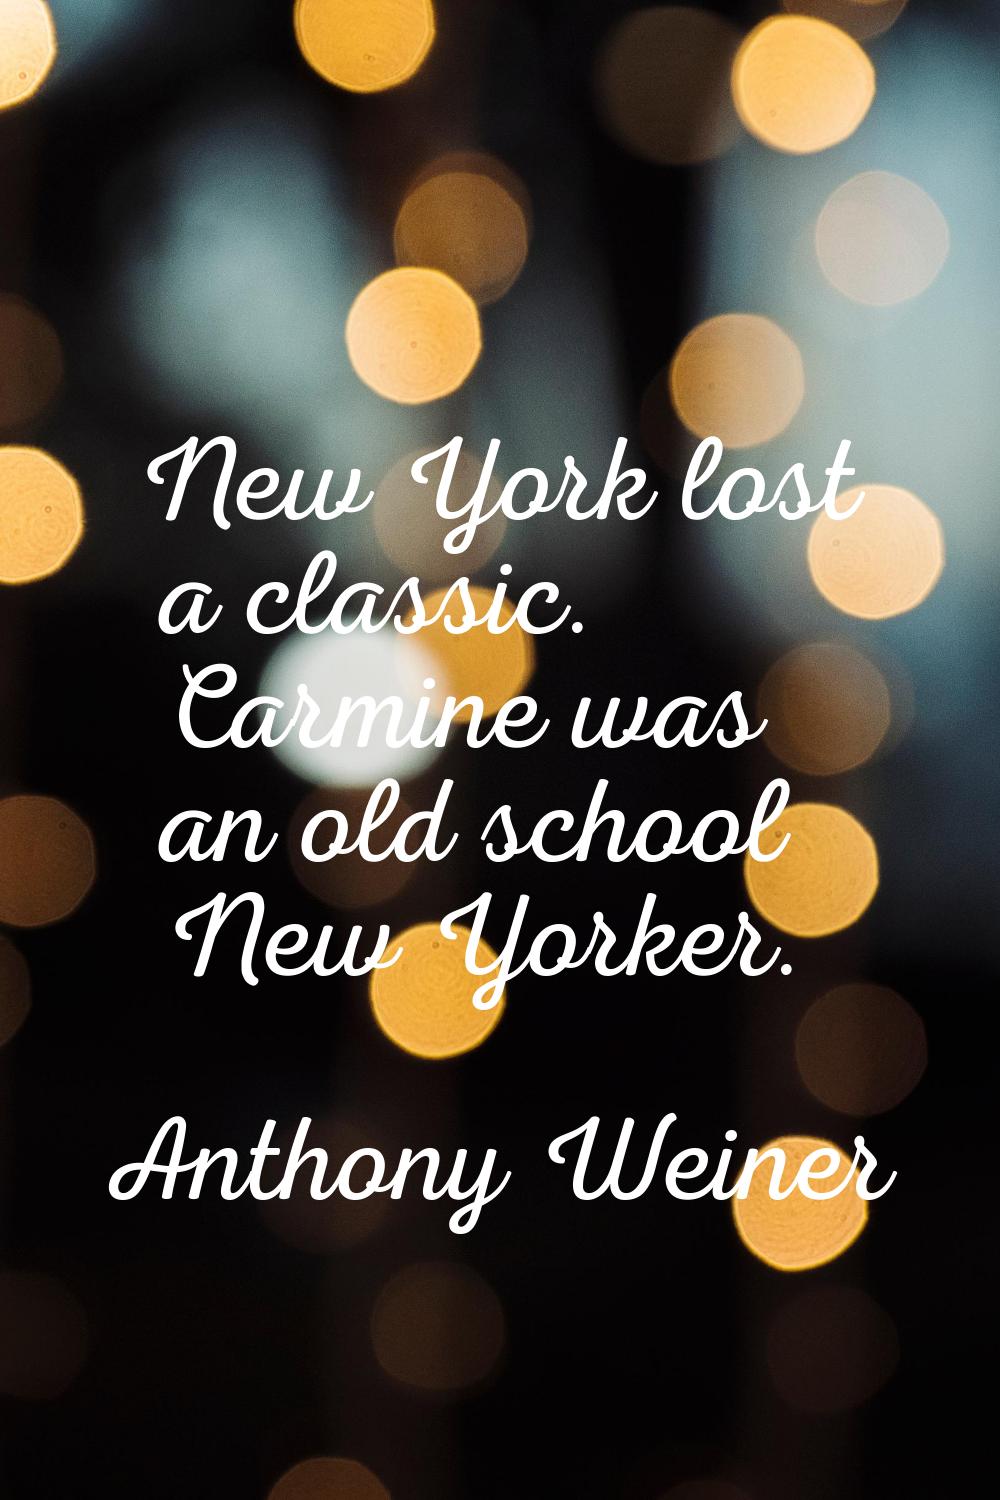 New York lost a classic. Carmine was an old school New Yorker.